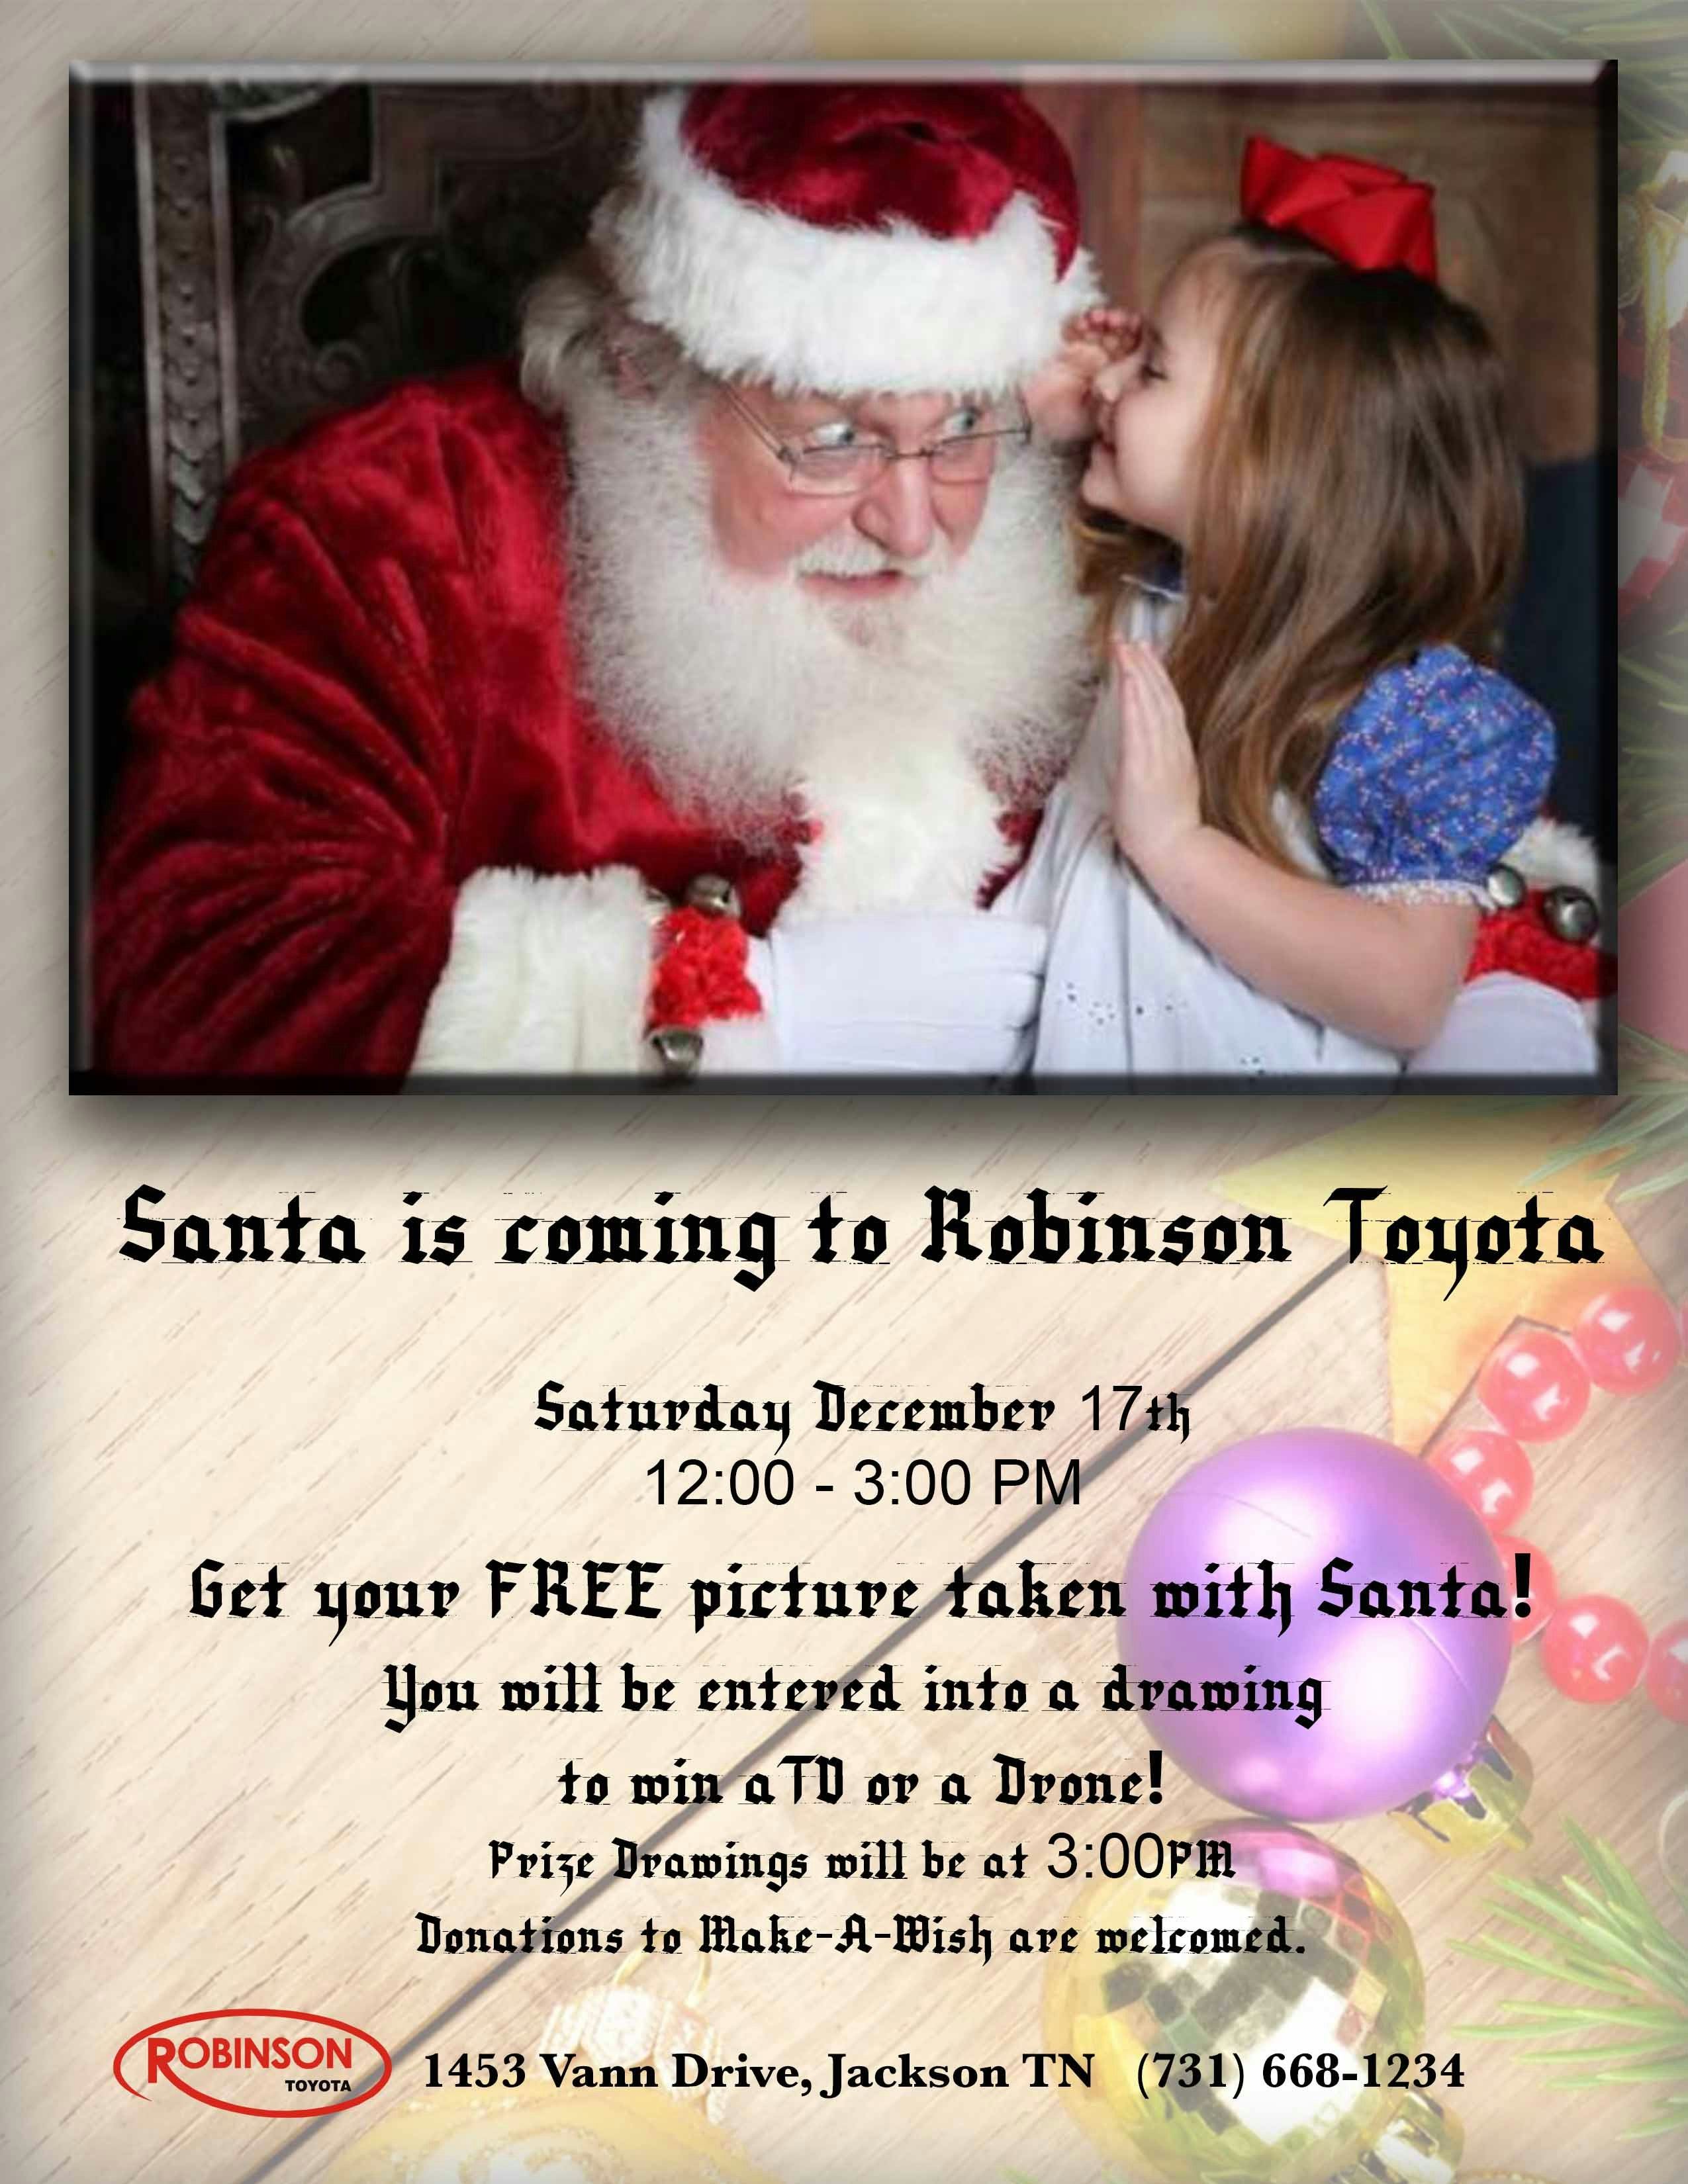 Come Meet Santa on Saturday December 17th from 12:00-3:00PM